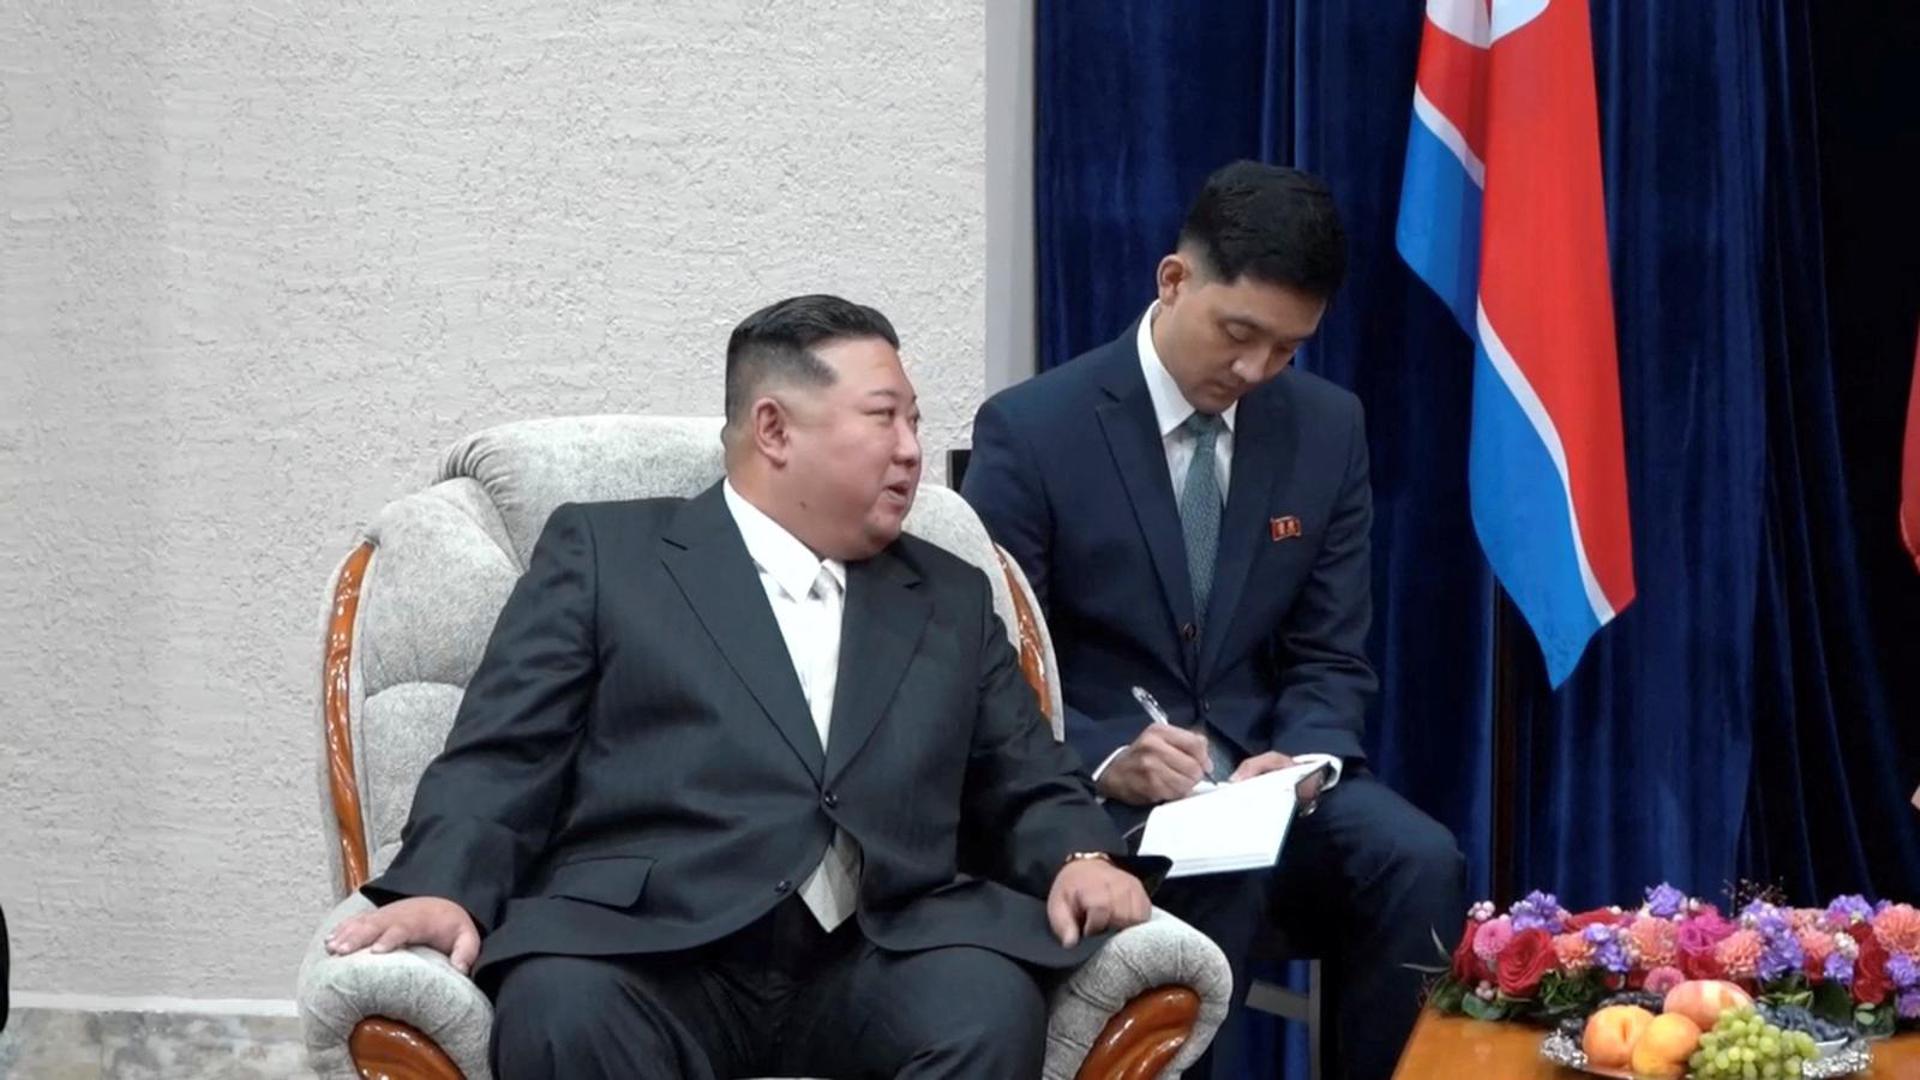 A view shows North Korean leader Kim Jong Un during a meeting with Russian Minister of Natural Resources and Environment Alexander Kozlov and other officials upon his arrival in Khasan in the Primorsky region, Russia, in this still image from video published September 12, 2023. Courtesy Governor of Russia's Primorsky Krai Oleg Kozhemyako Telegram Channel via REUTERS ATTENTION EDITORS - THIS IMAGE WAS PROVIDED BY A THIRD PARTY. NO RESALES. NO ARCHIVES. MANDATORY CREDIT. Photo: OLEG KOZHEMYAKO TELEGRAM CHANNEL/REUTERS